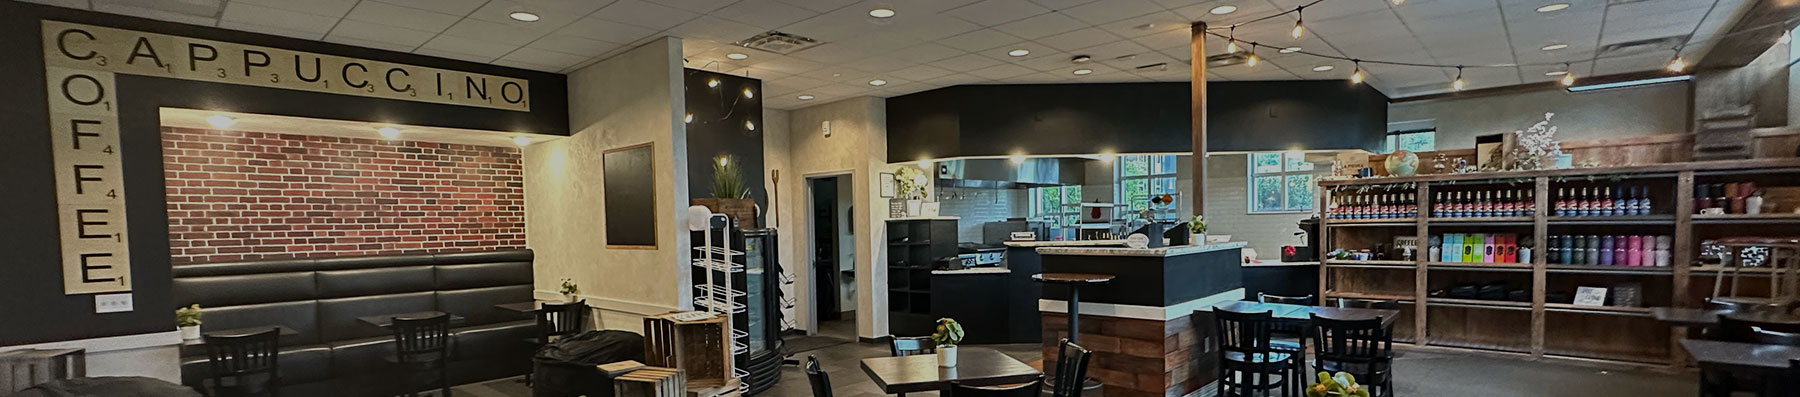 Southpointe (Canonsburg, PA) new coffee shop